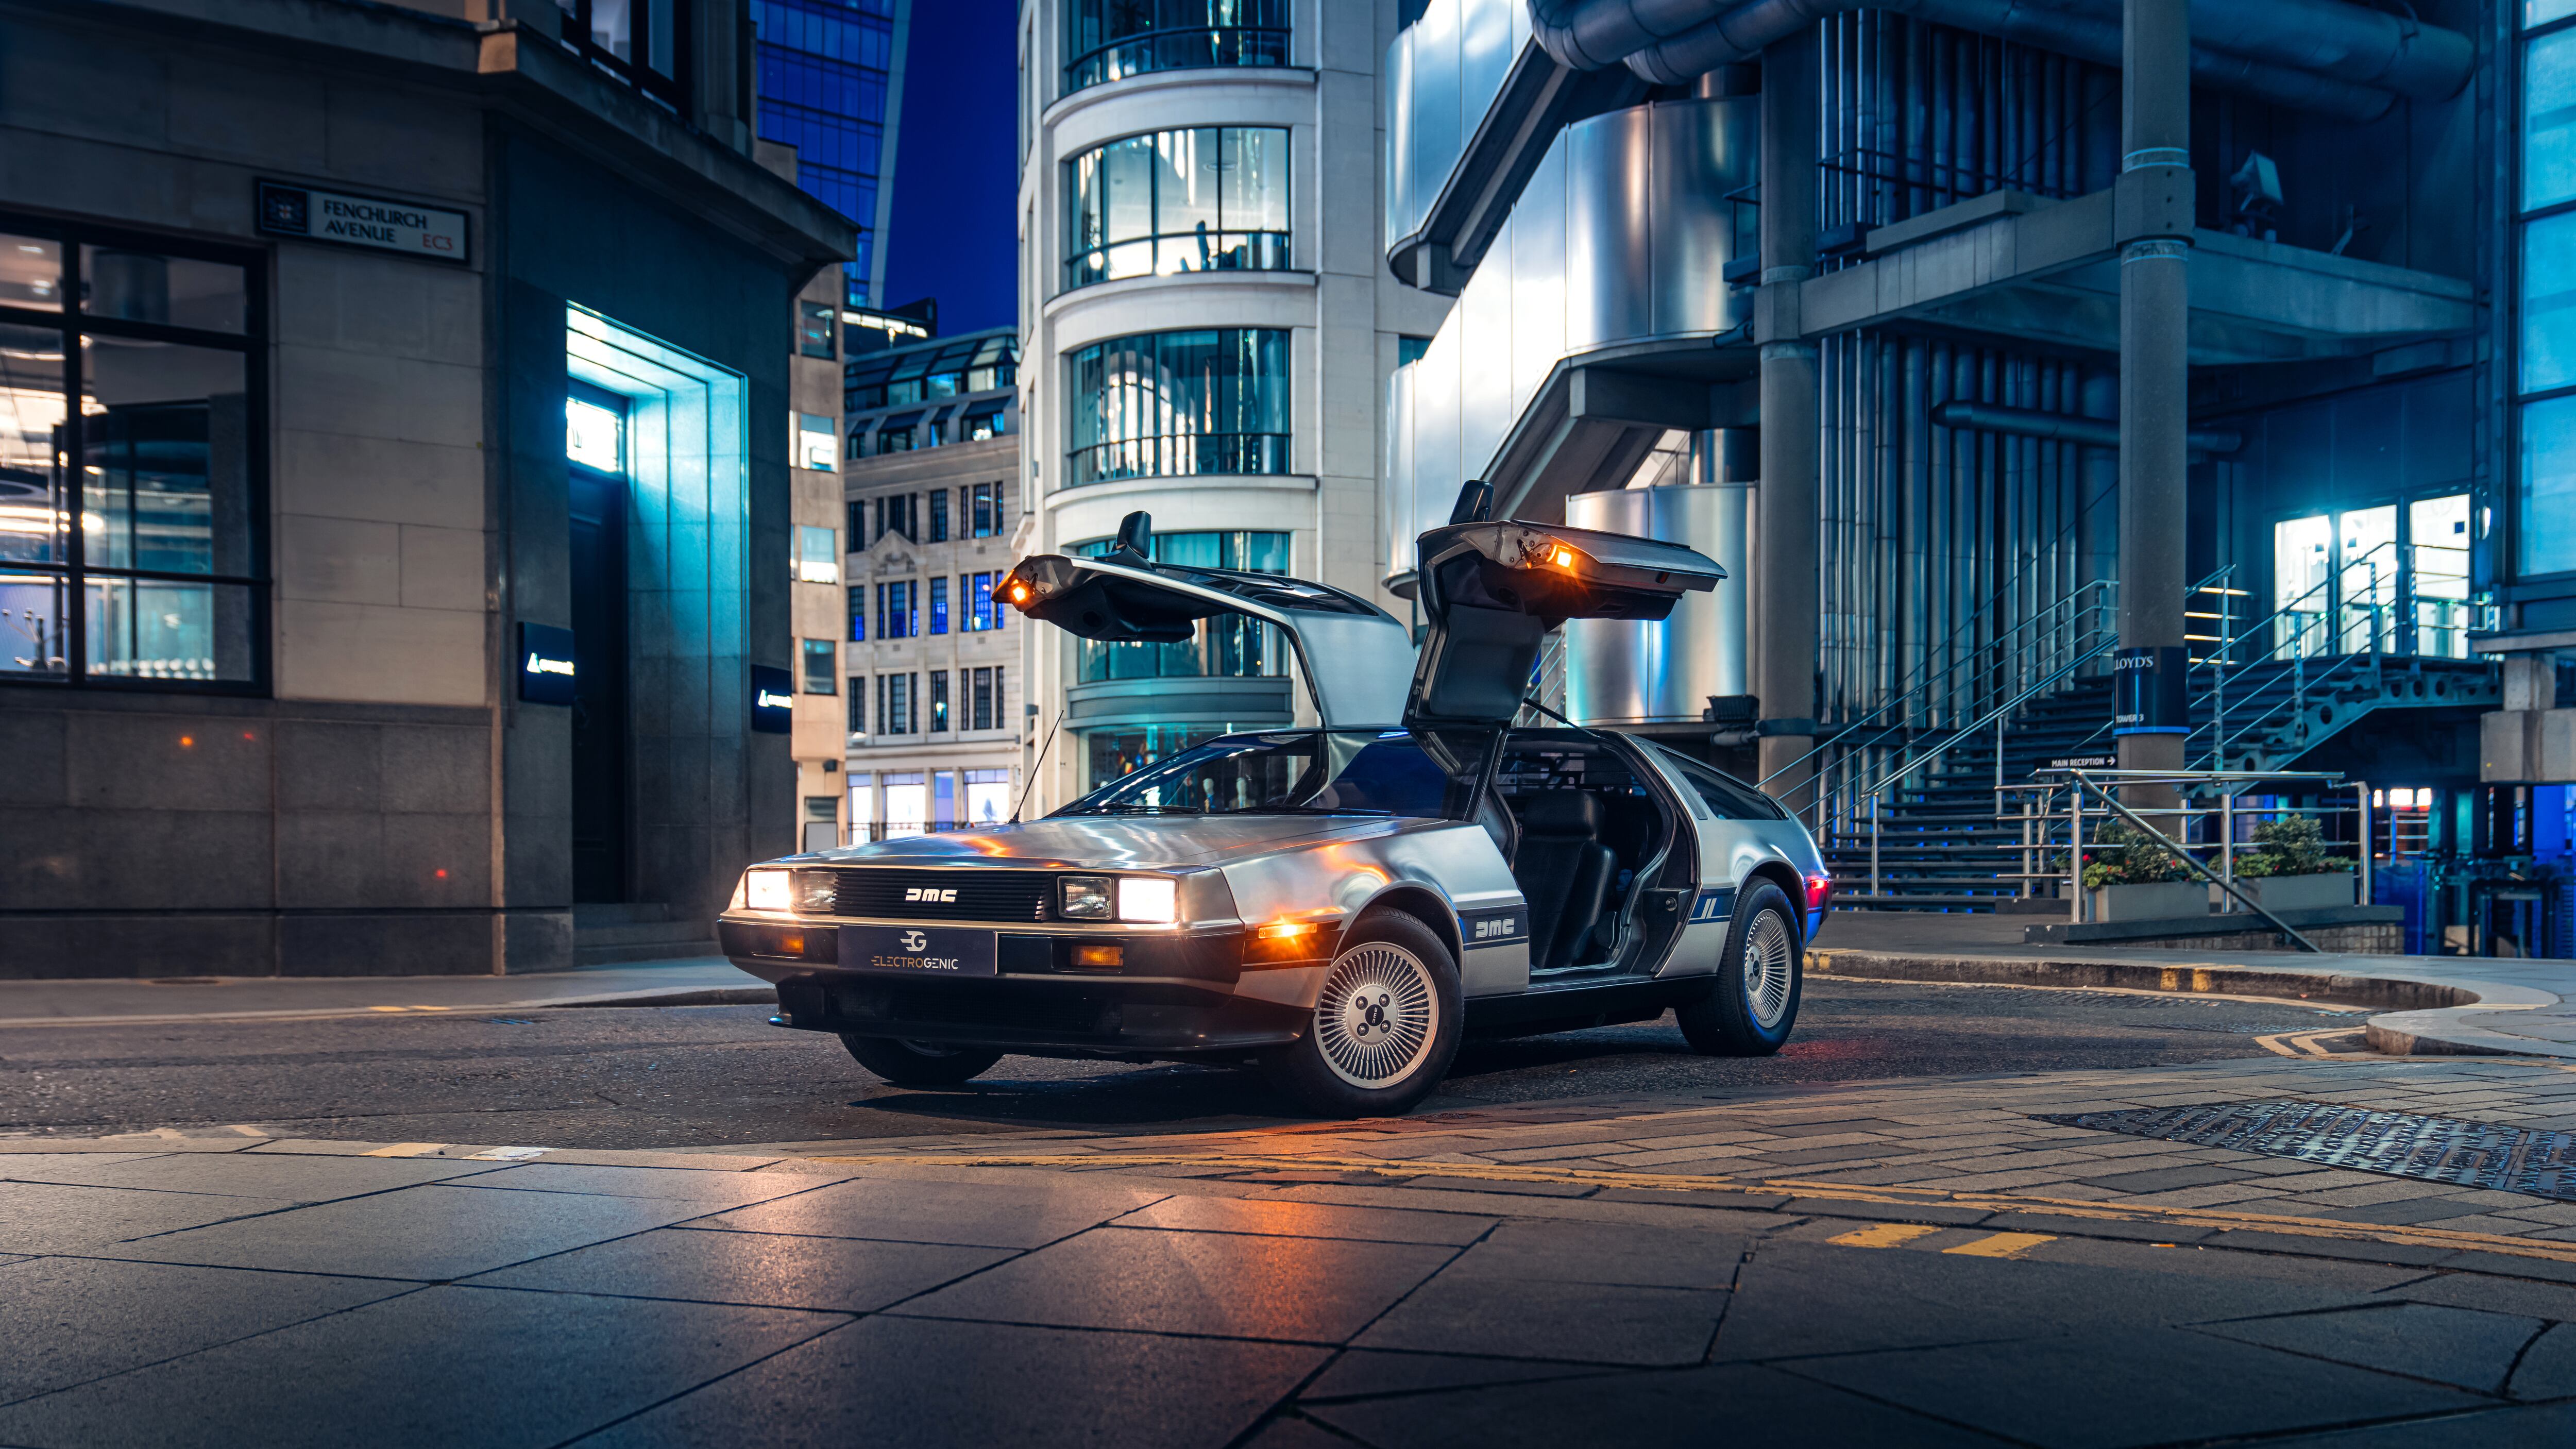 Electrogenic have just launched a new EV conversion kit for the DeLorean